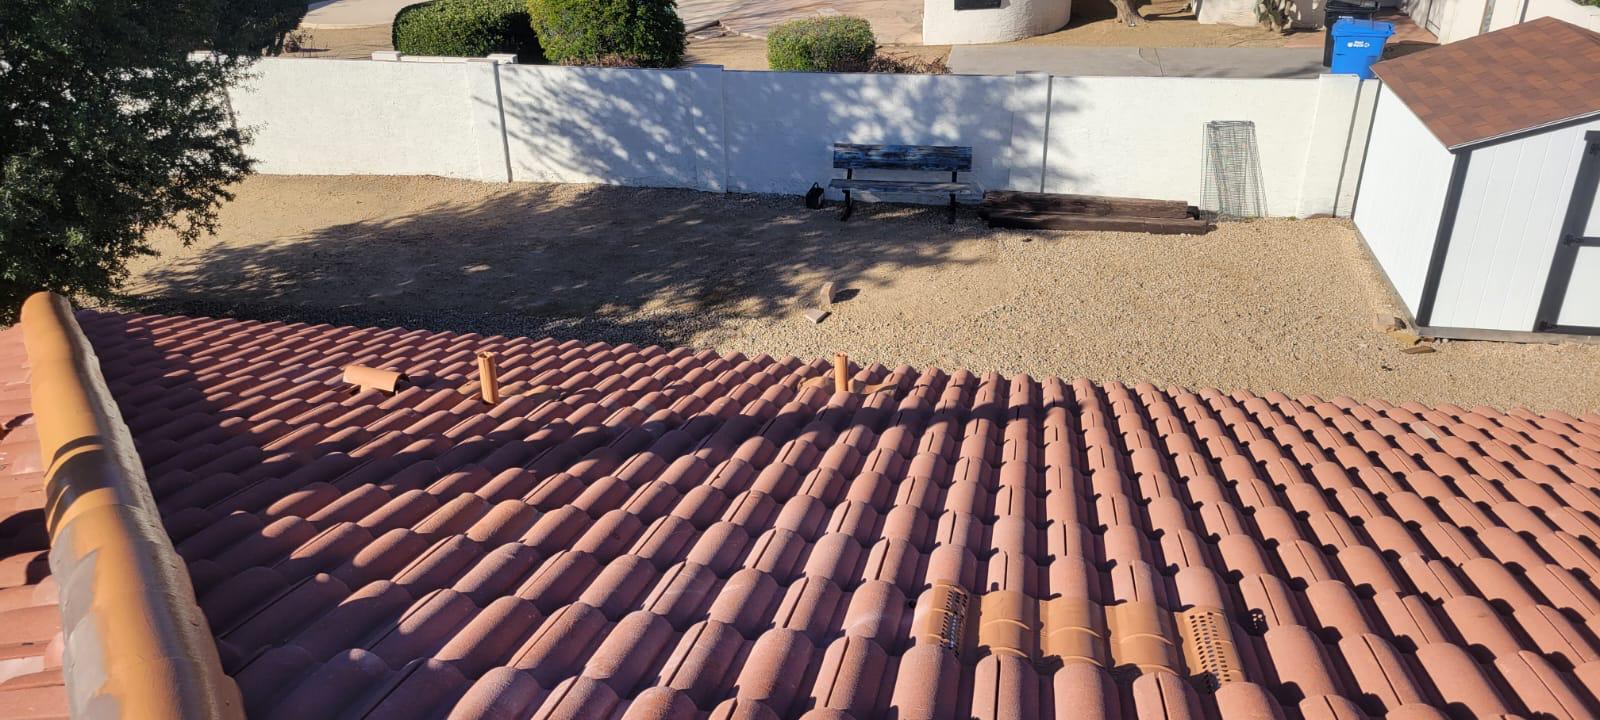 Close-up view of tiles commonly used in McCormick Ranch roof leak repairs.